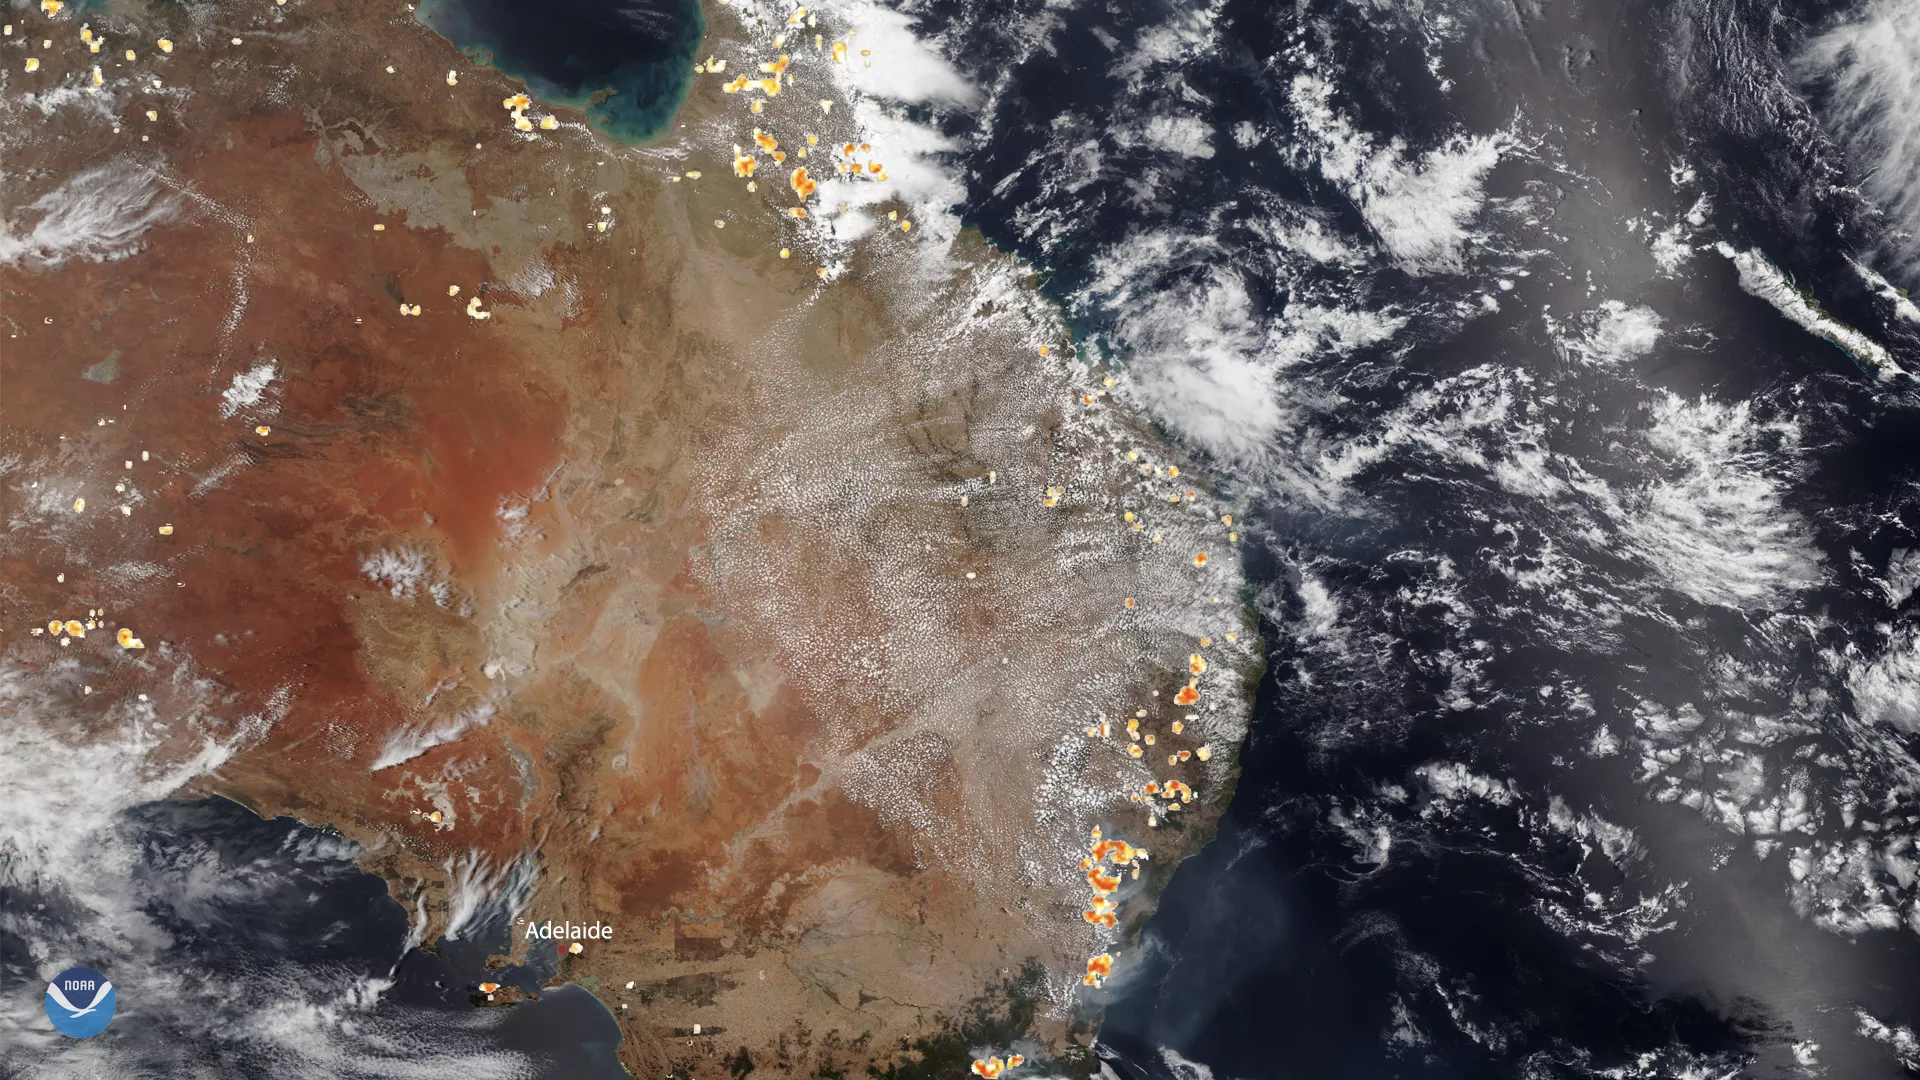 NOAA-20 imagery of Australia on Dec. 26, where historic bushfires still rage in the southeastern states and territories and are especially intense around the South Australian city of Adelaide.